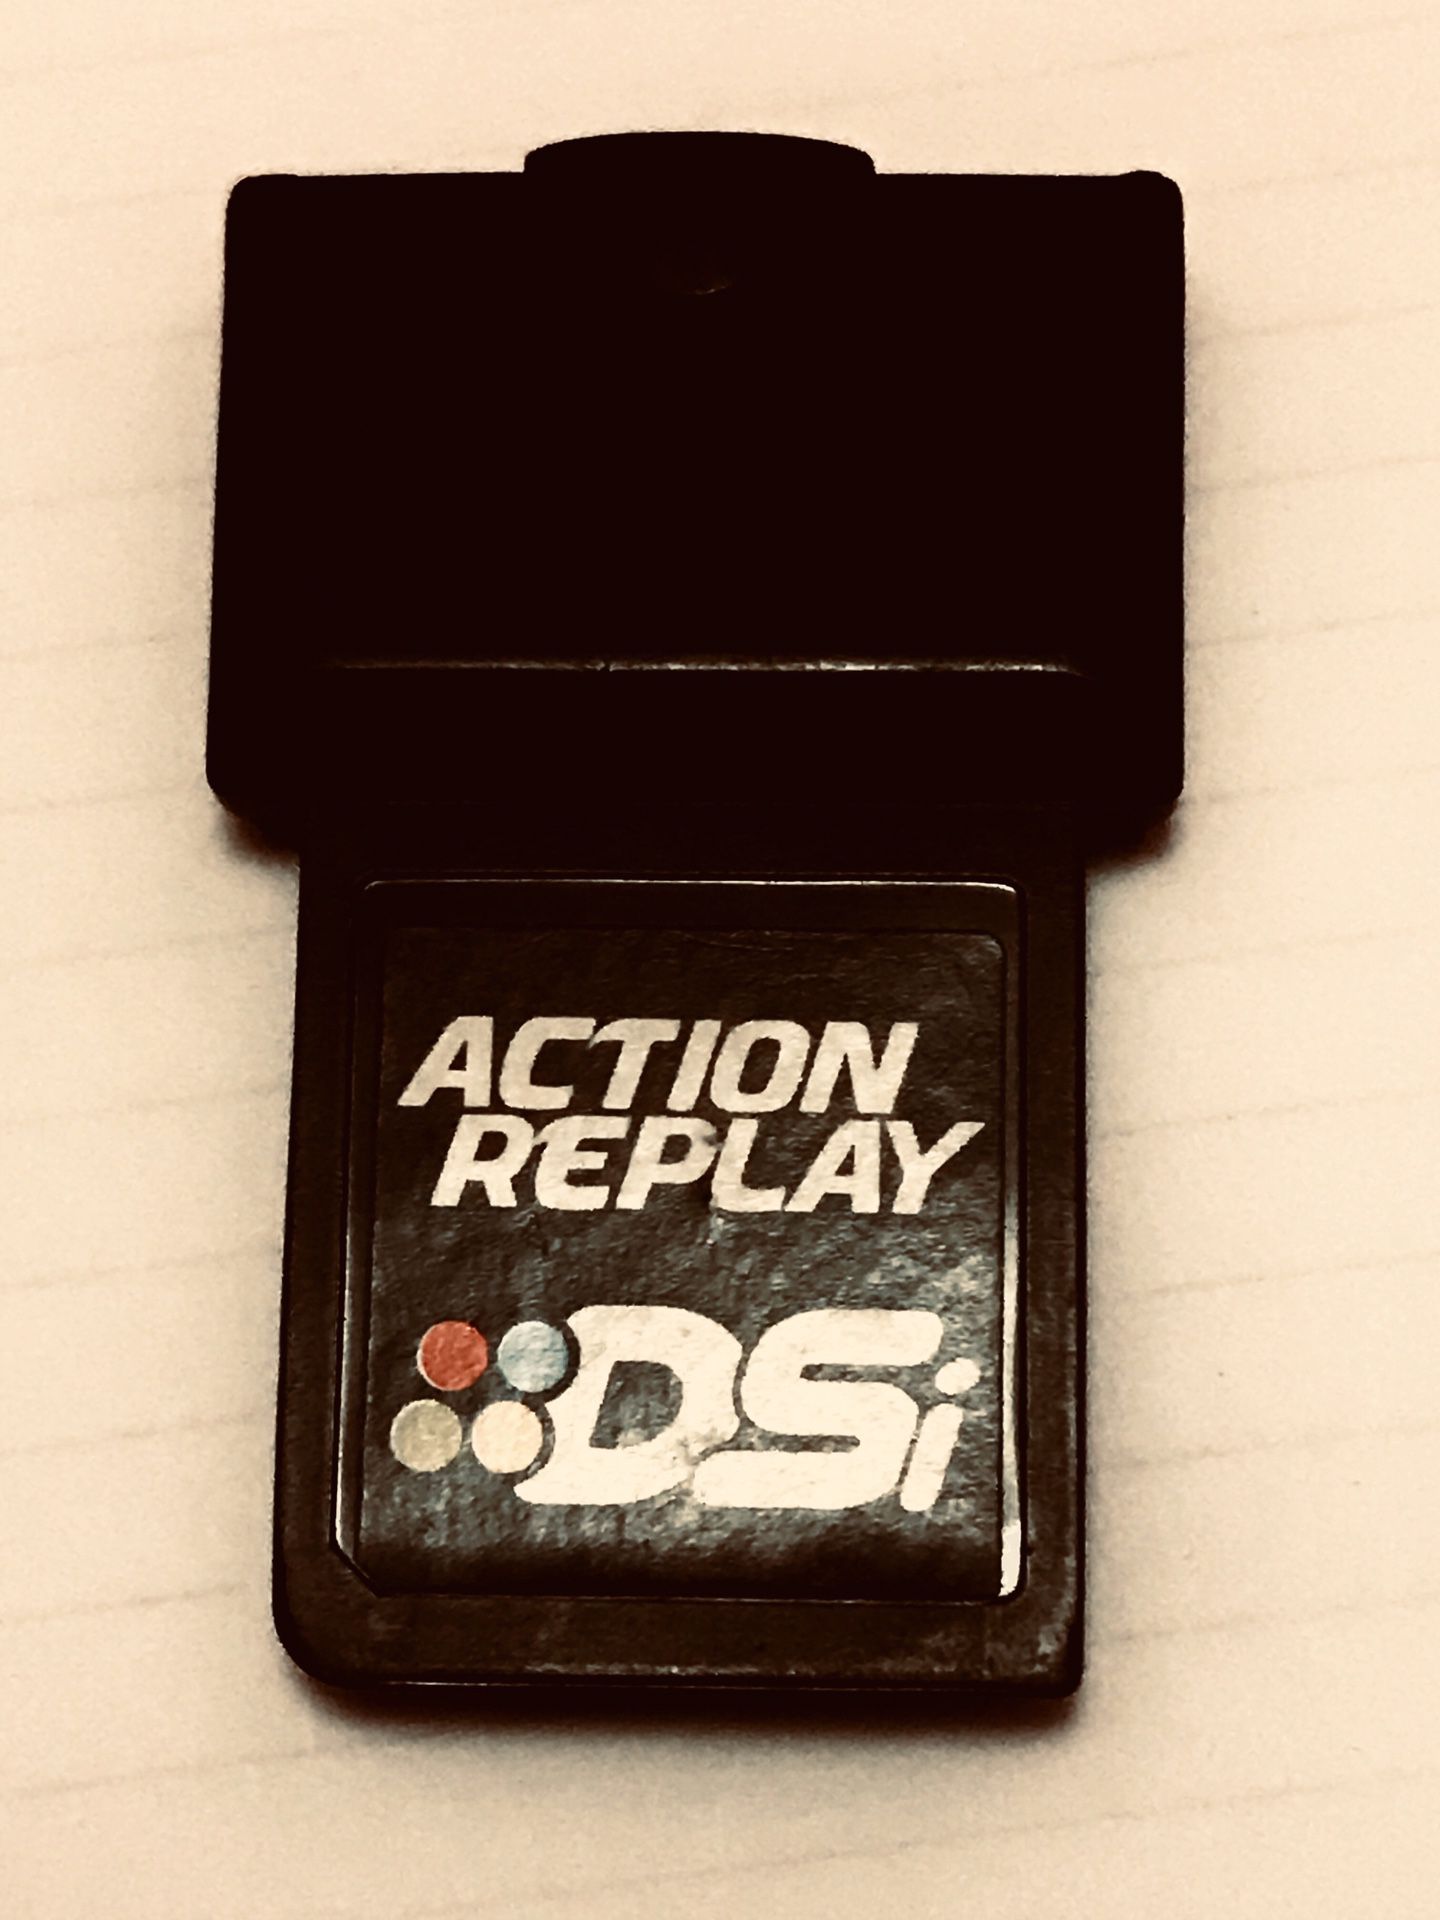 ACTION REPLAY DSI FOR NINTENDO DS GAME SYSTEM- TESTED WORKS GREAT!